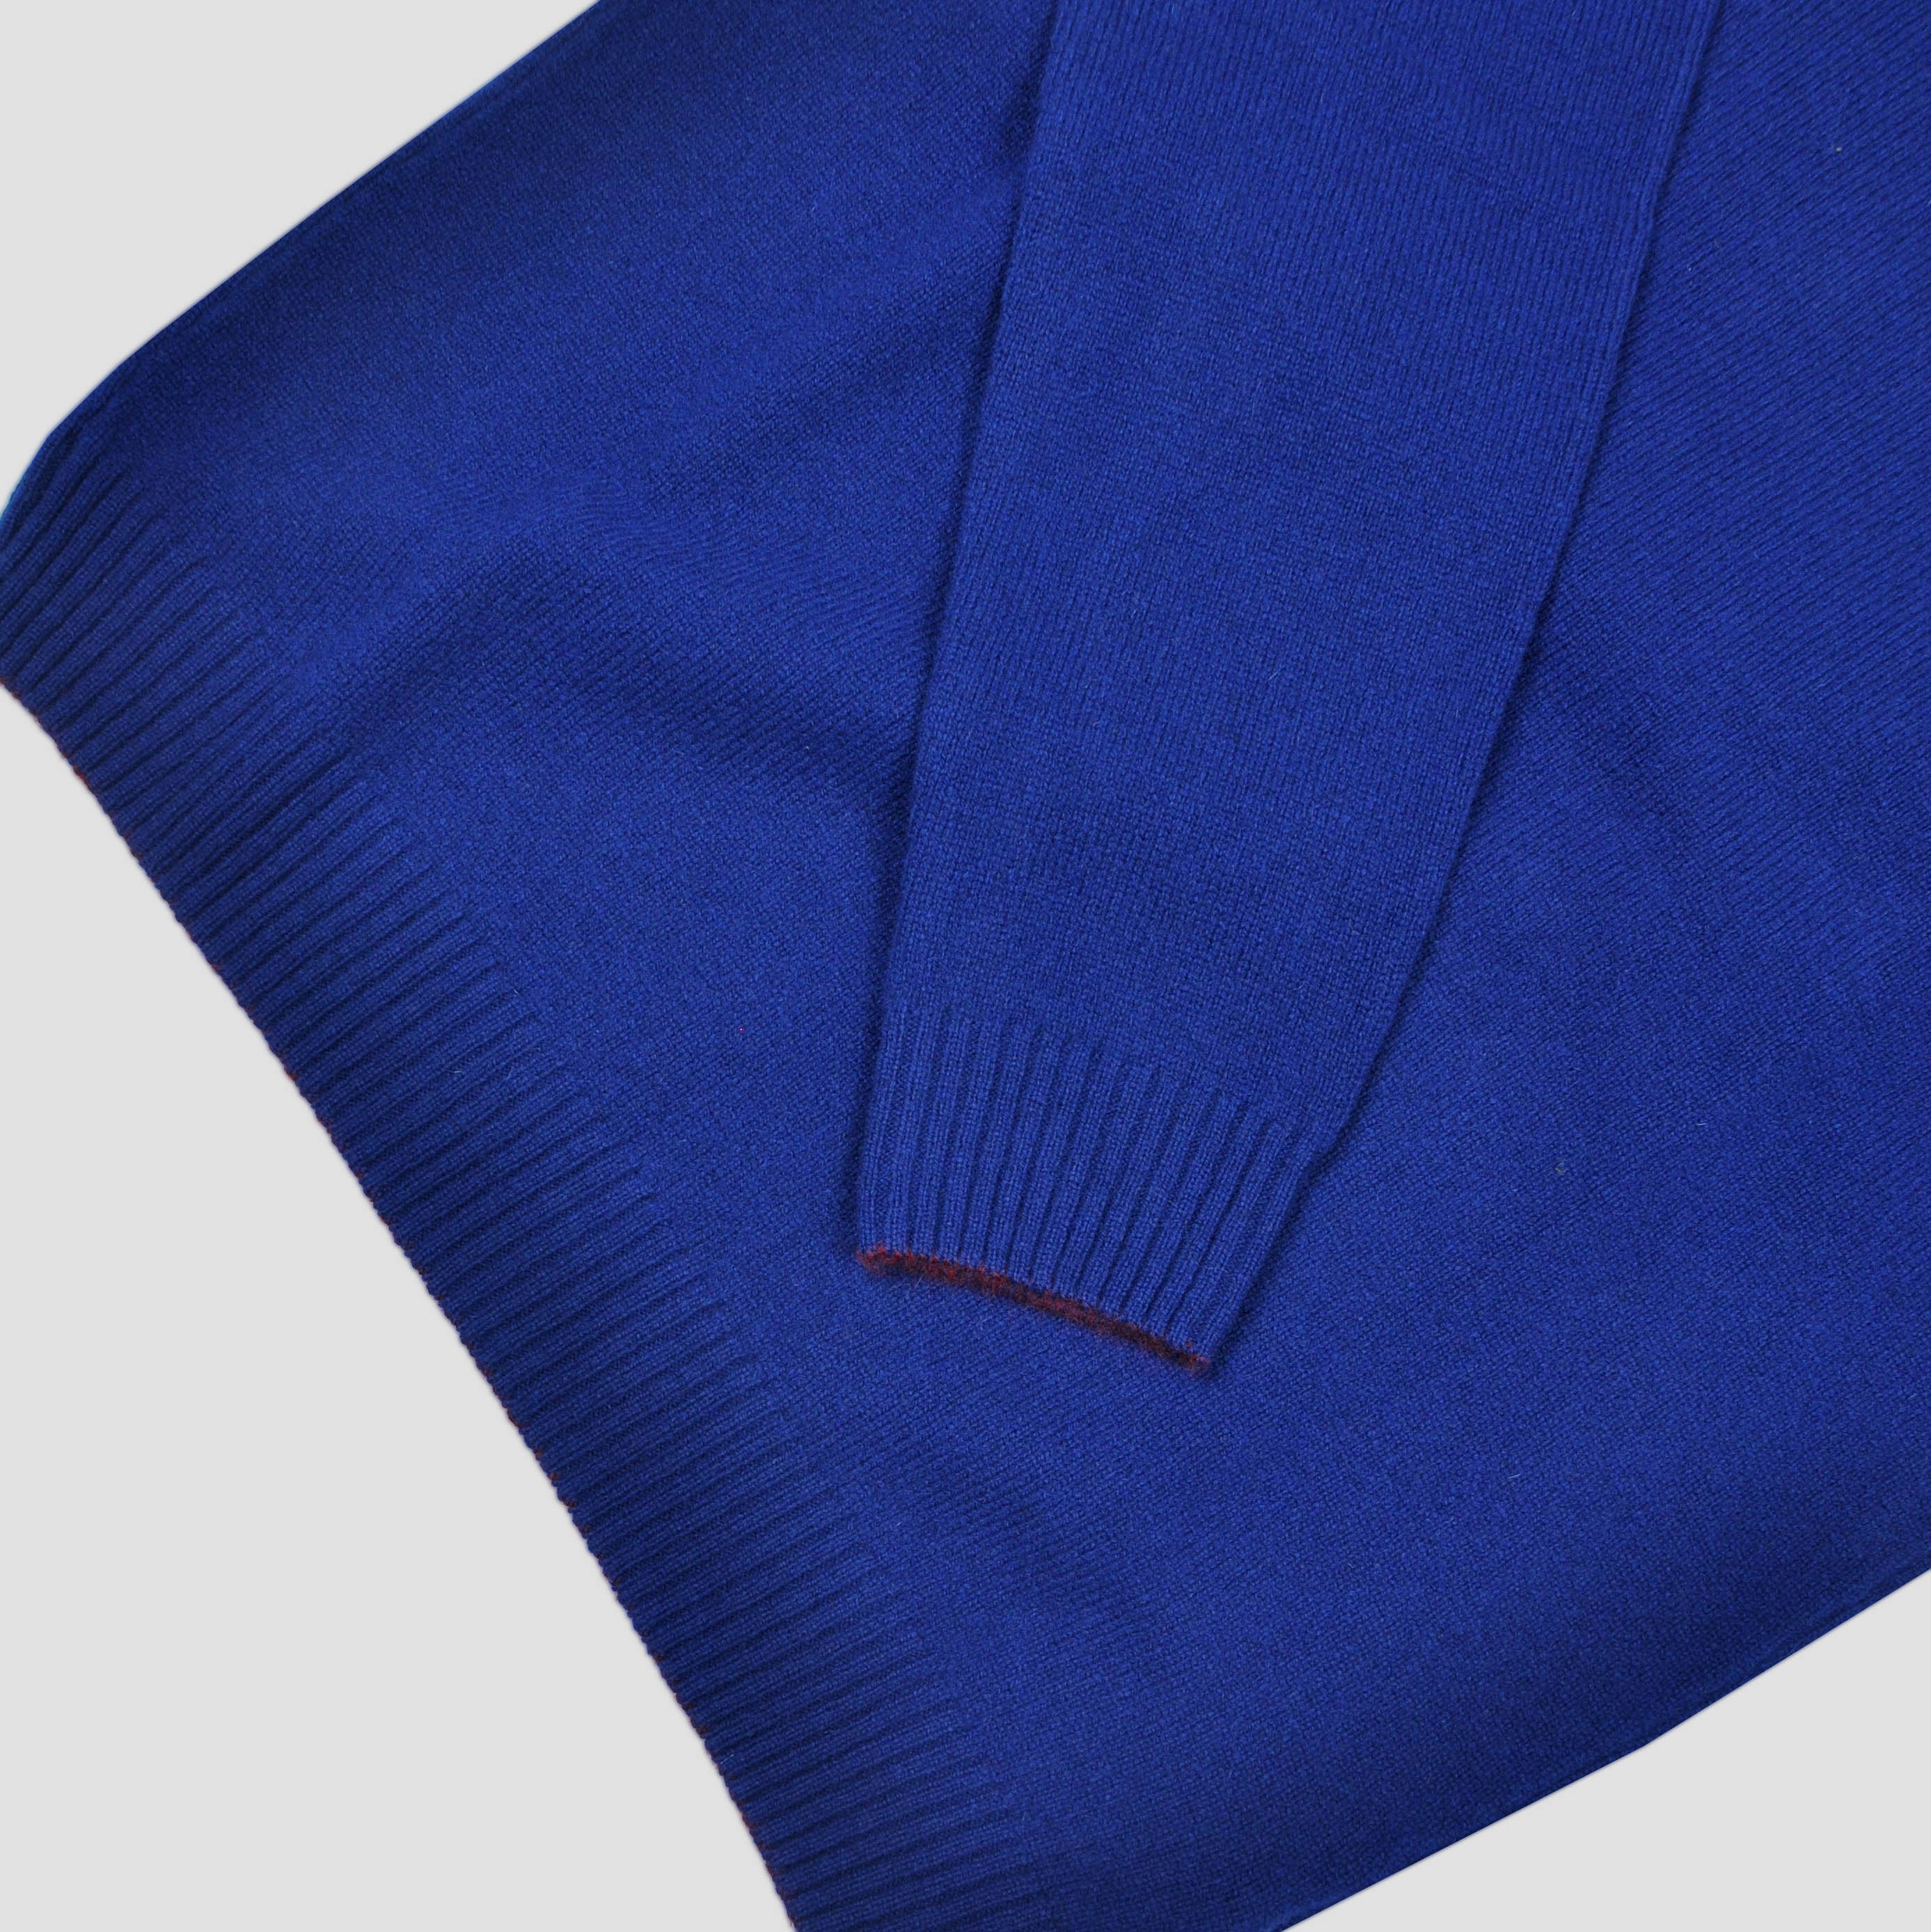 Merino Wool Crew Neck in Royal Blue with Claret Trim